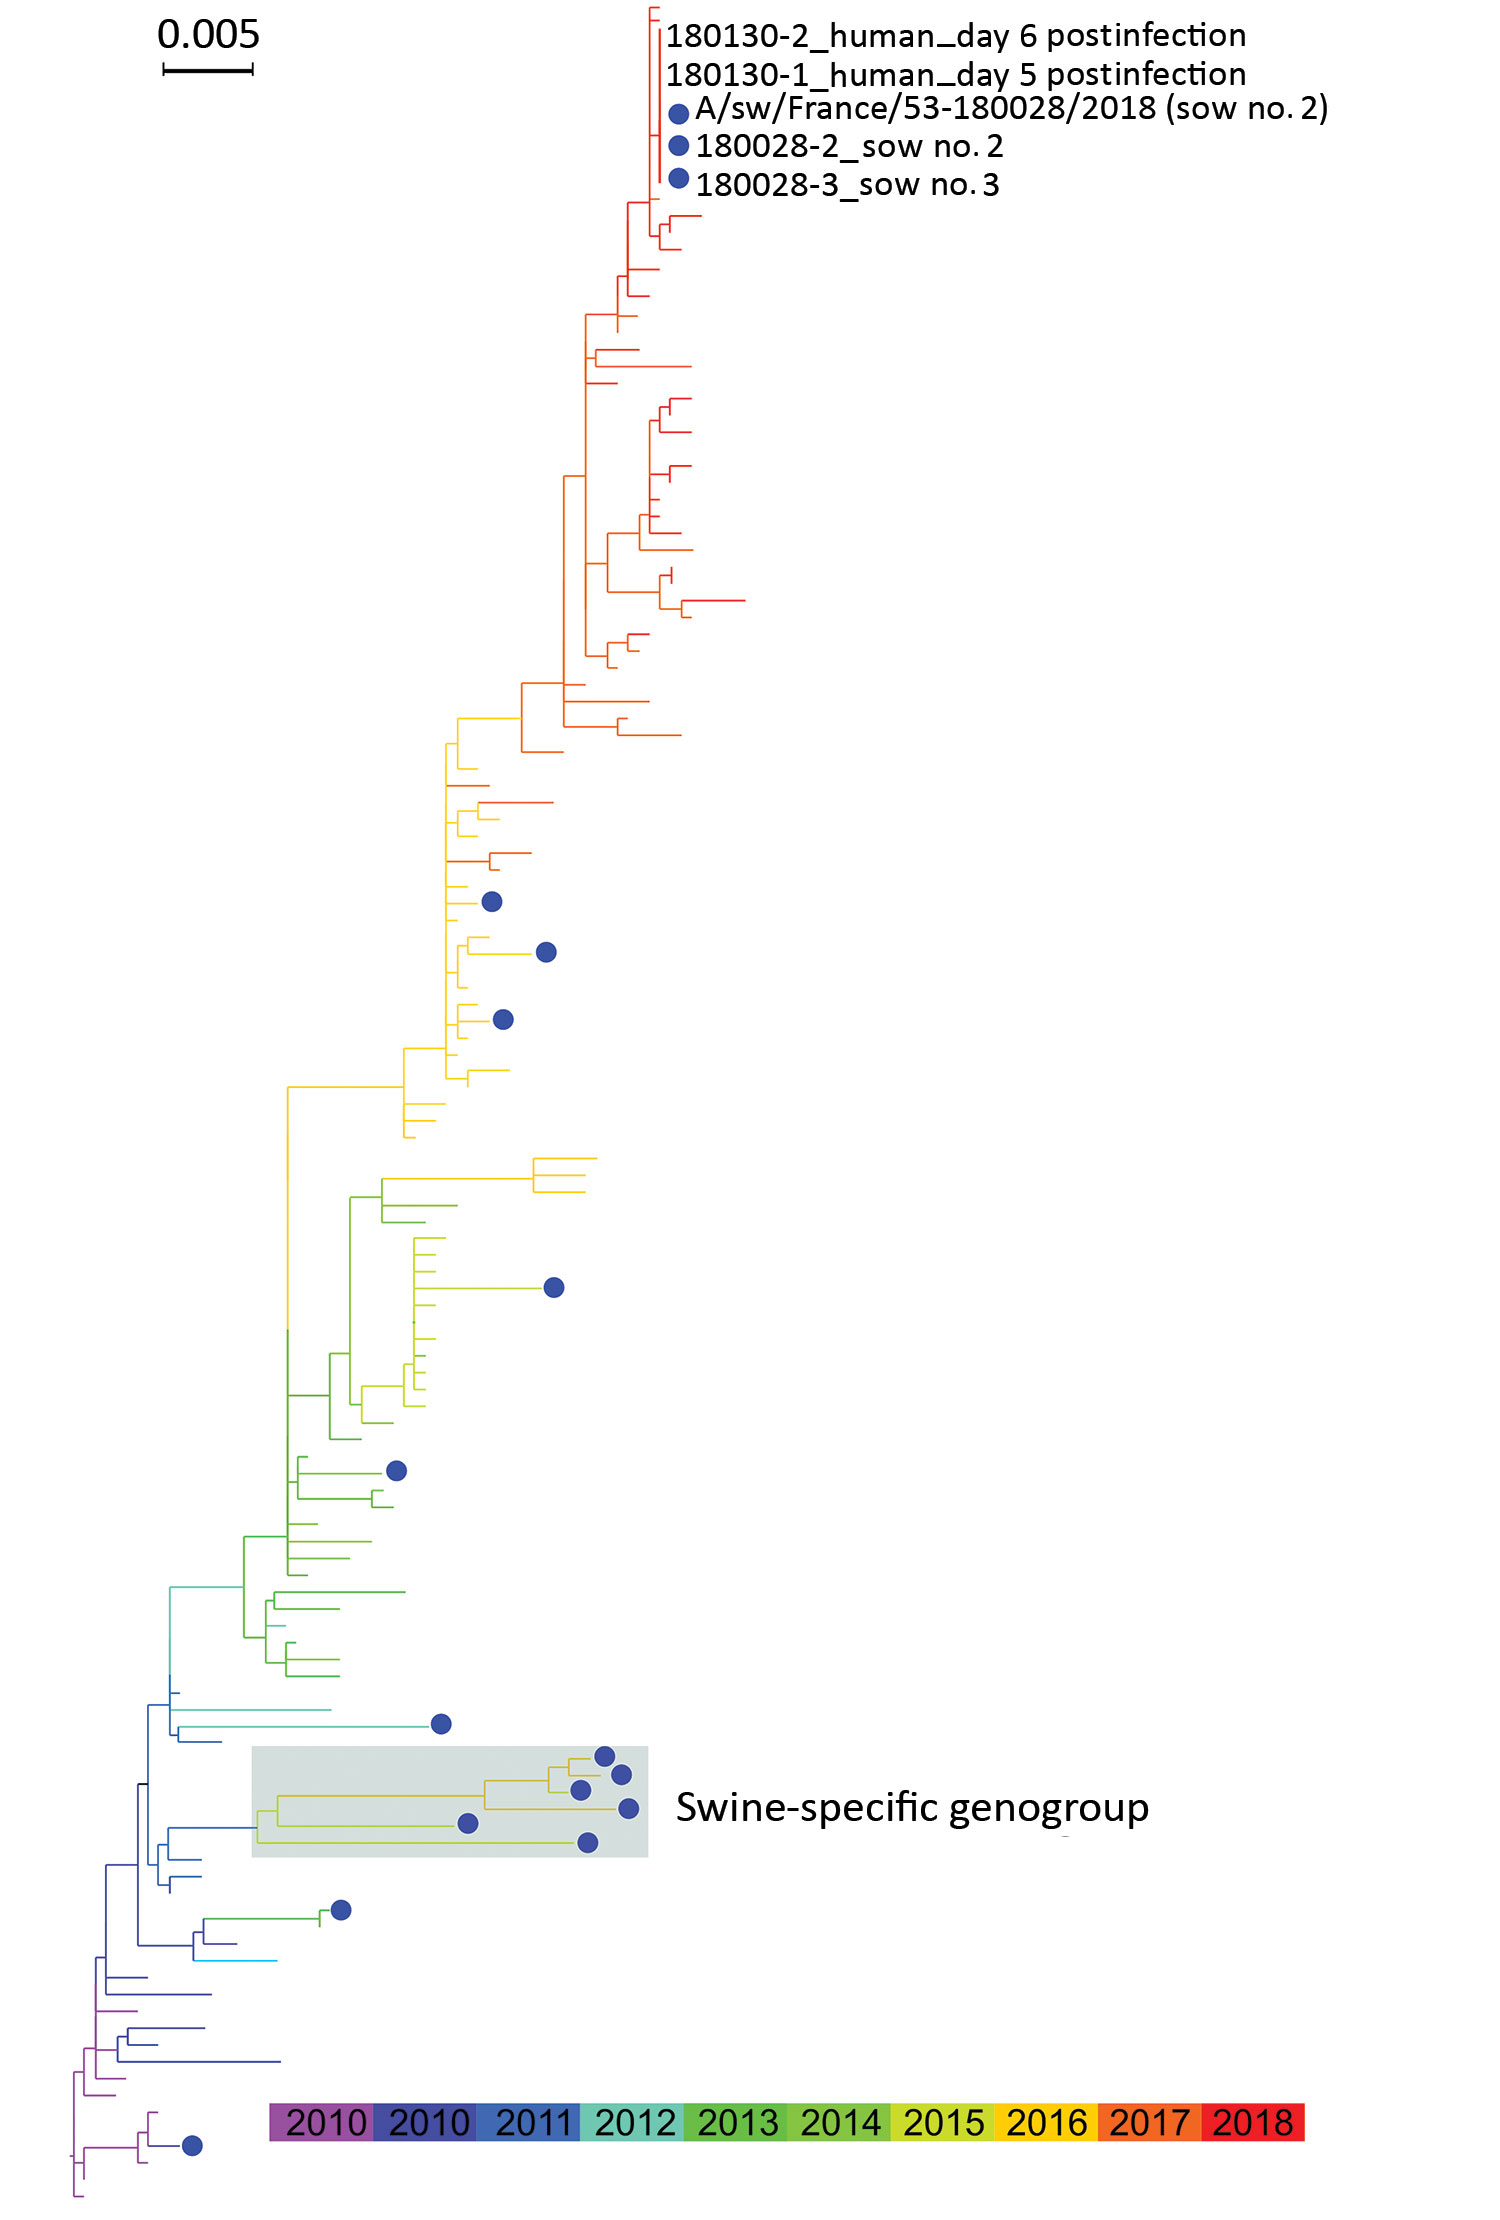 Maximum-likelihood phylogenetic tree of hemagglutinin segments from influenza A(H1N1)pdm09 isolates from swine (blue dots) and humans, France, 2009–2018. Shaded box indicates swine-specific genogroup previously described by Chastagner et al. (6).